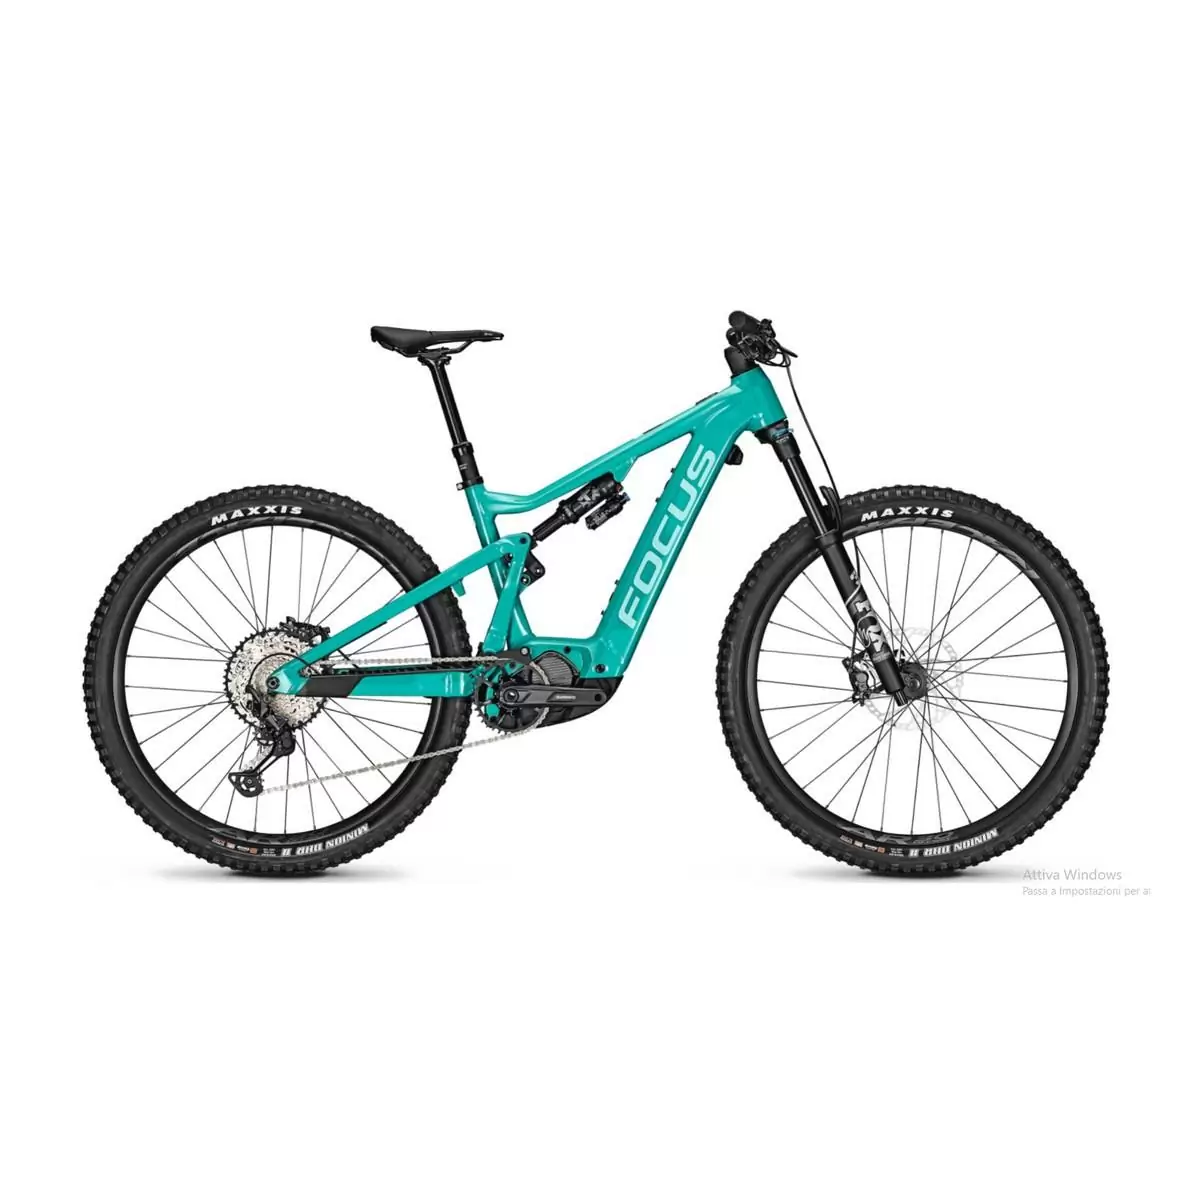 Jam2 7.9 29'' 150mm 12v 720Wh Shimano EP8 Bluegreen Glossy 2022 Size S - image